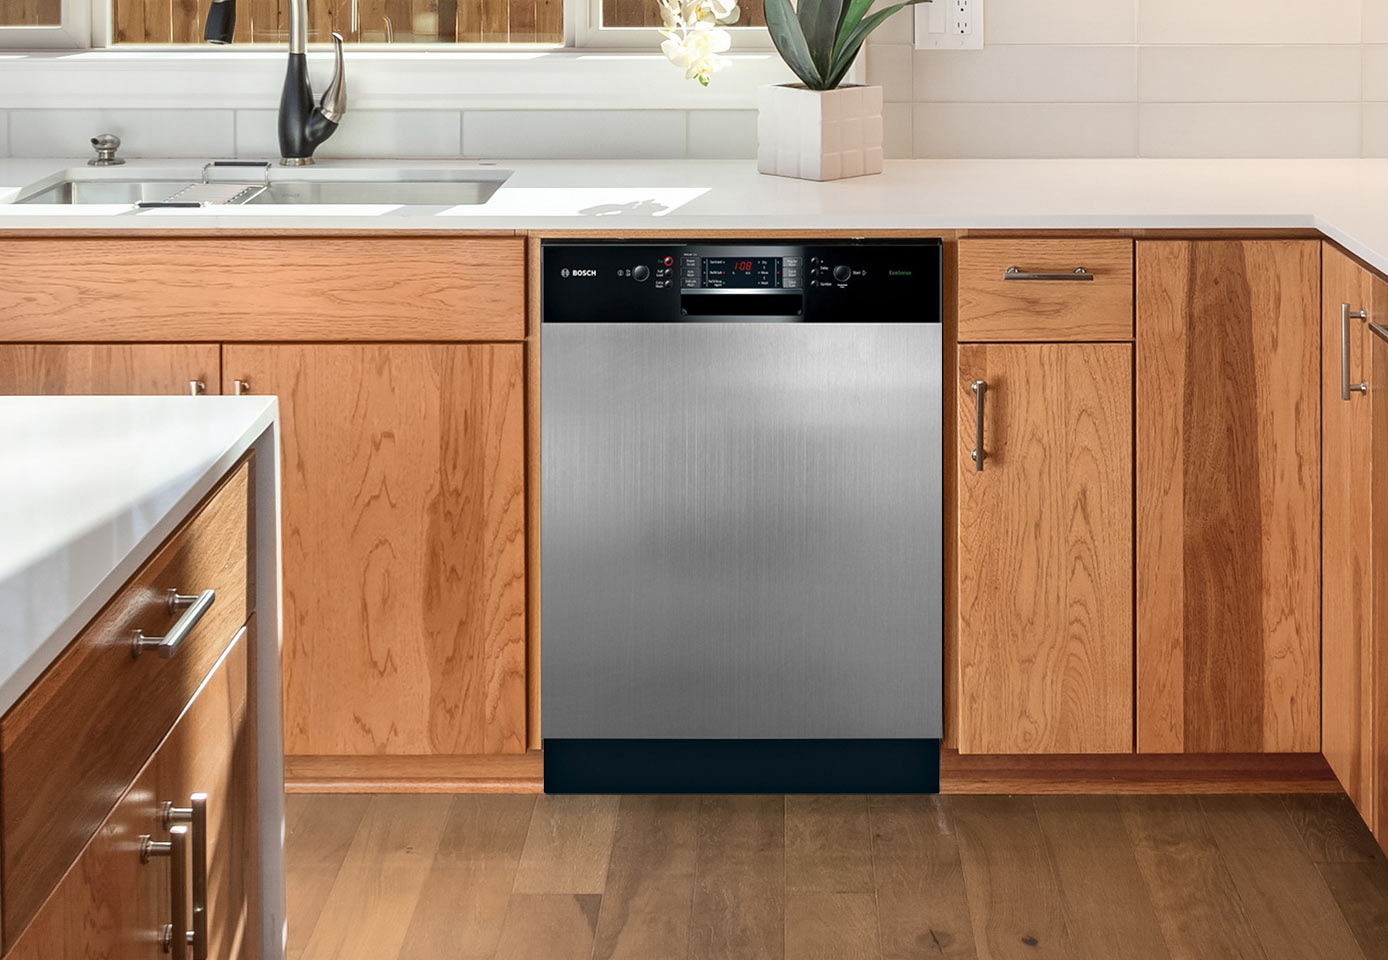 Instant Stainless magnetic cover on a dishwasher with a black control panel.